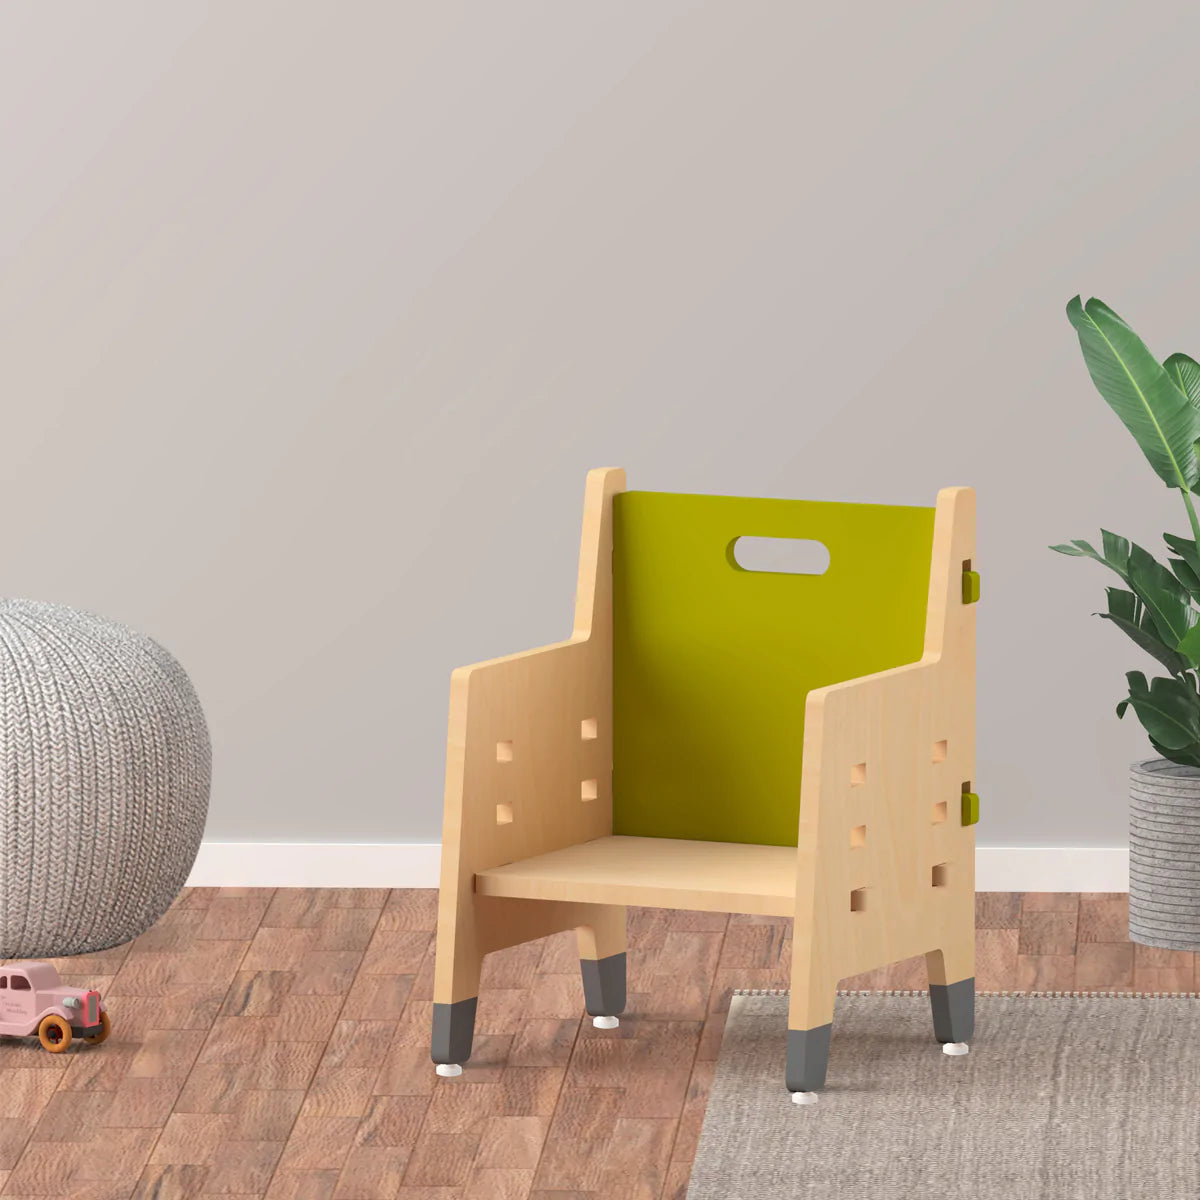 Buy Purple Mango Weaning Wooden Chair - Green - Learning Furniture - SkilloToys.com